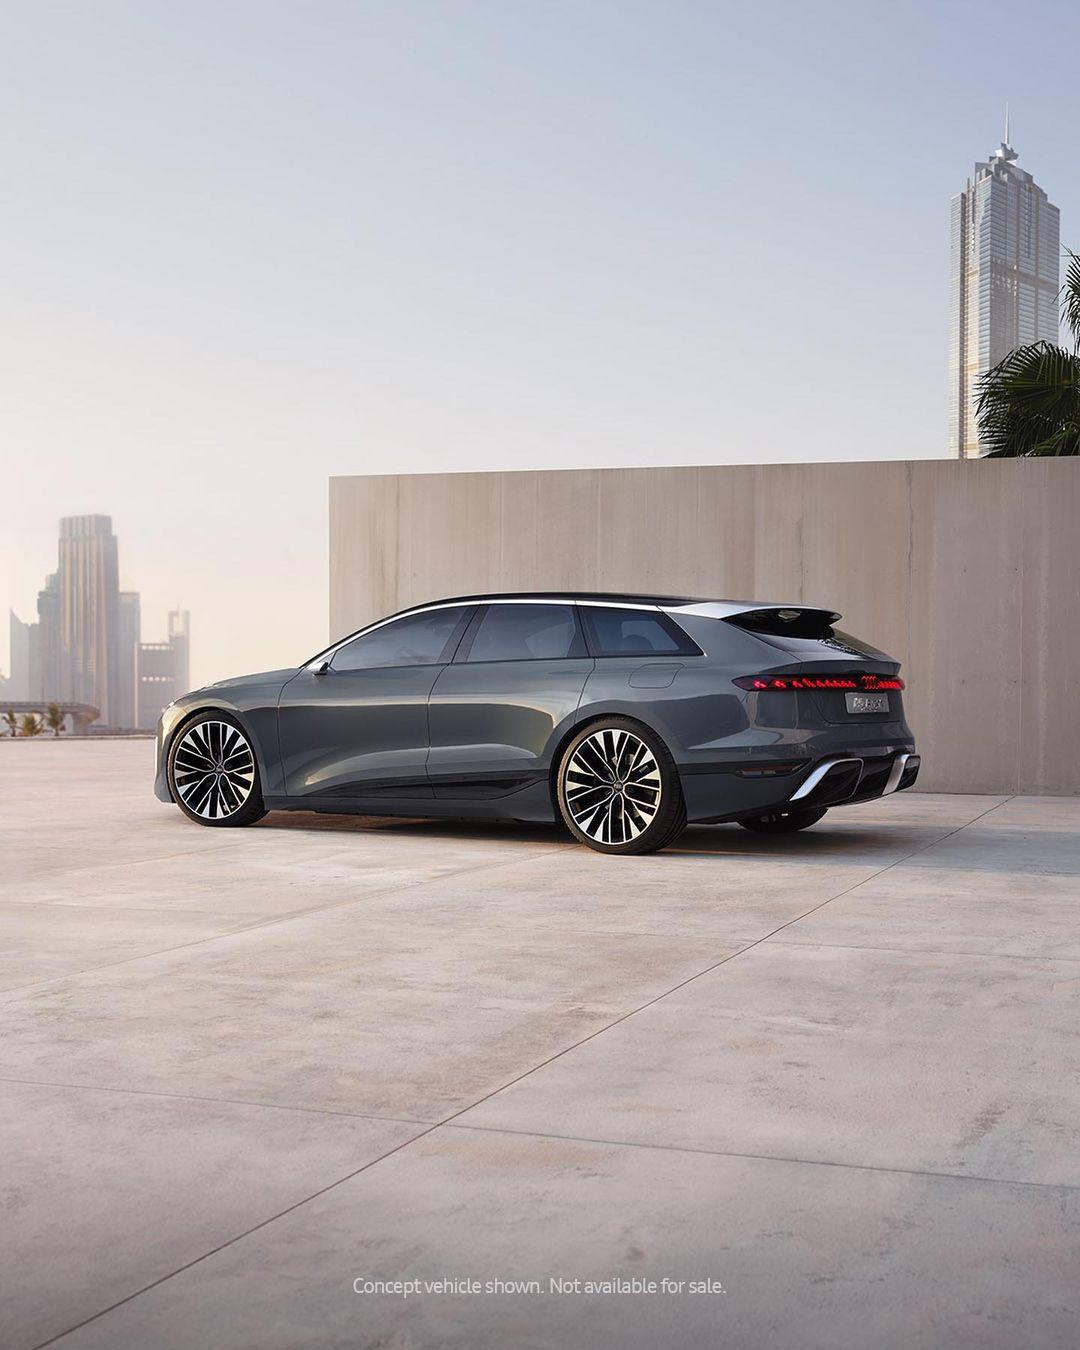 
 The balance of beauty and boldness. Meet the new, all-electric Audi A6 Avant e-tron concept. Visit our link in bio to see more. #FutureIsAnAttitude #Audi #concept #emobility 
 